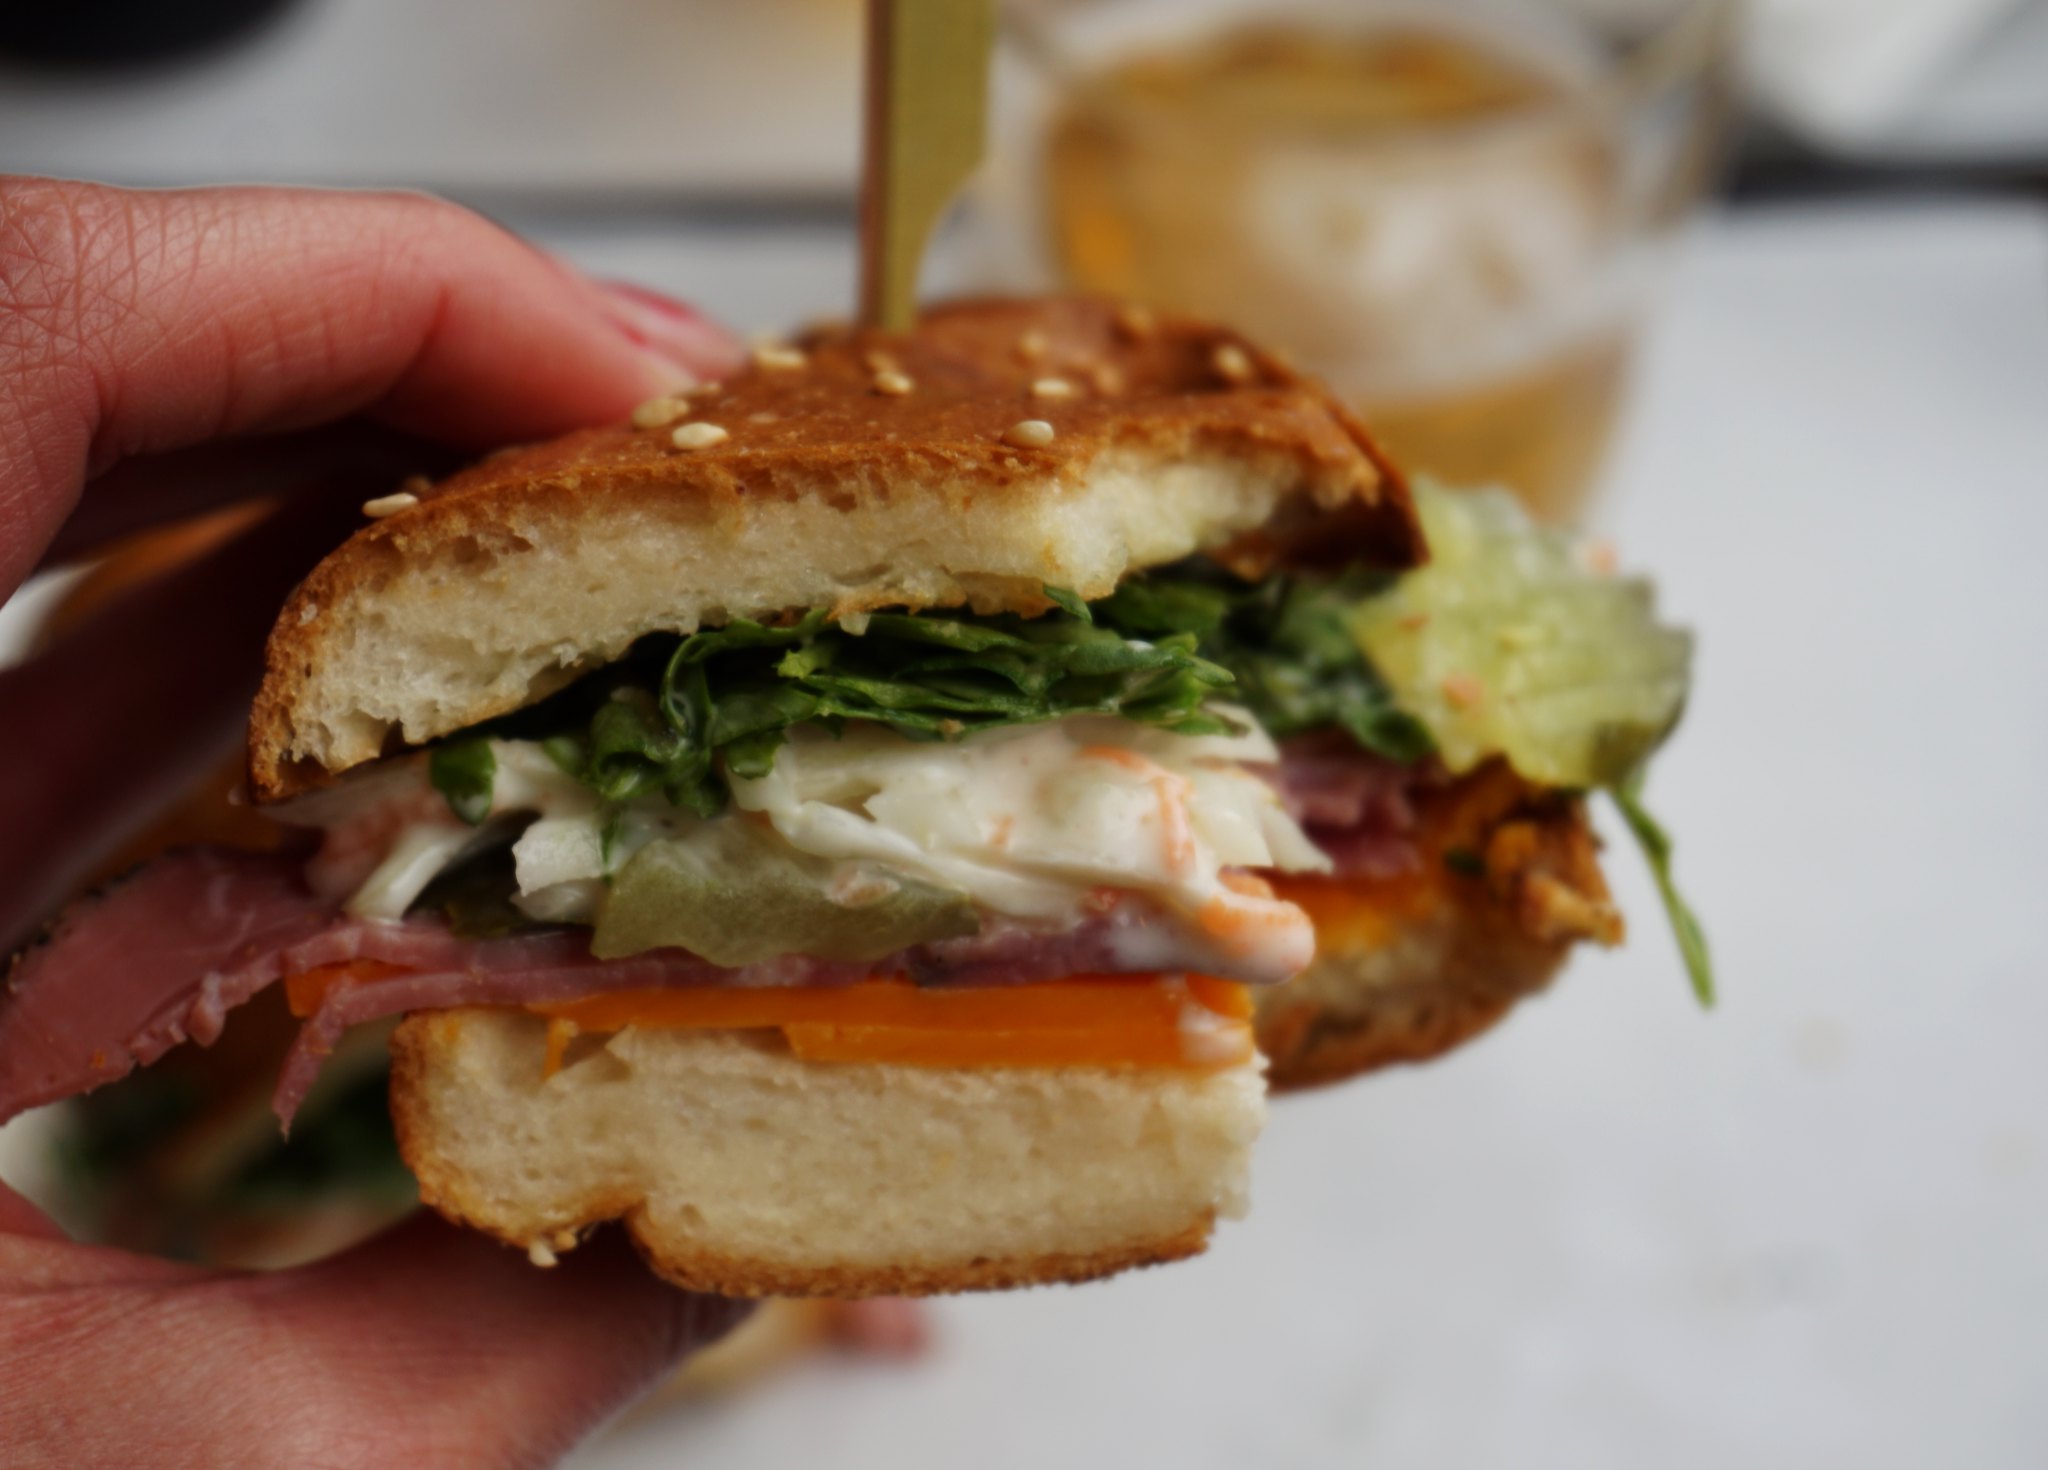 Gluten free sandwich from Bears and Raccoon in Paris, France